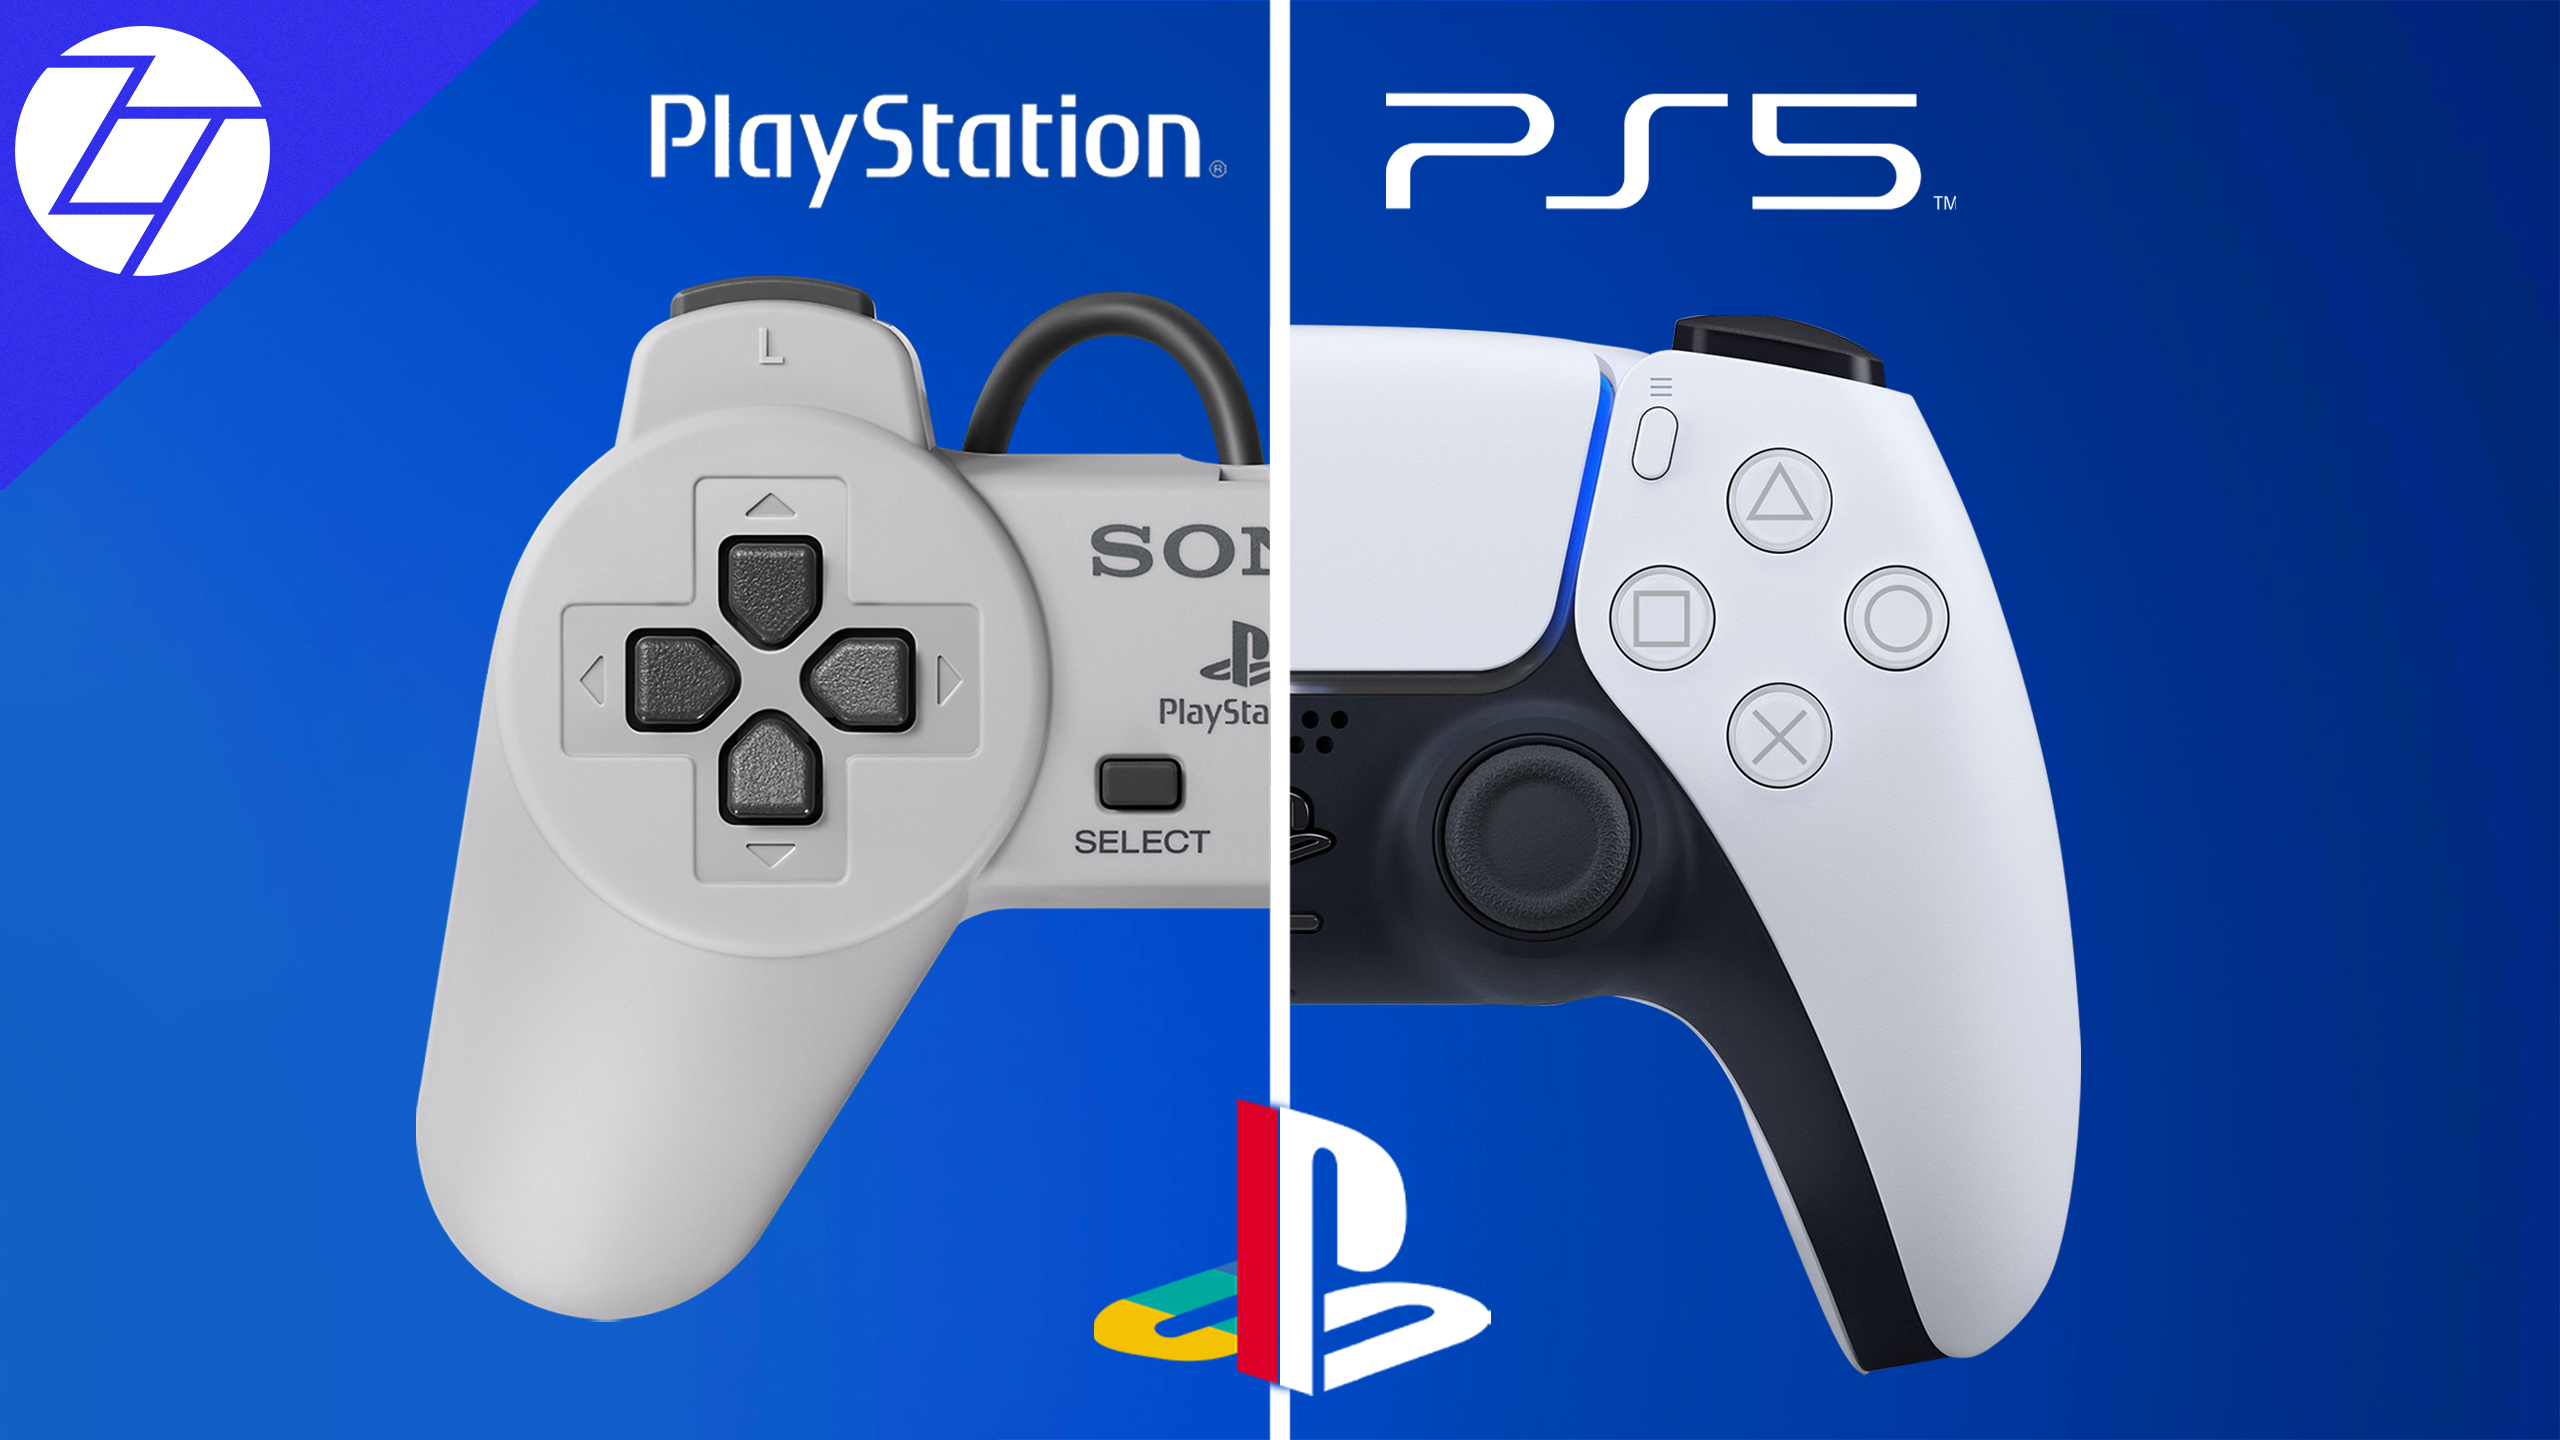 Библиотека ps5. Evolution PLAYSTATION Consoles and Contollers PS 1 PS 5. Ps1 Controller vs ps2 Controller. Контроллер PLAYSTATION 5 vs PLAYSTATION 4. Evolution of PLAYSTATION Controllers 1994 - 2020.